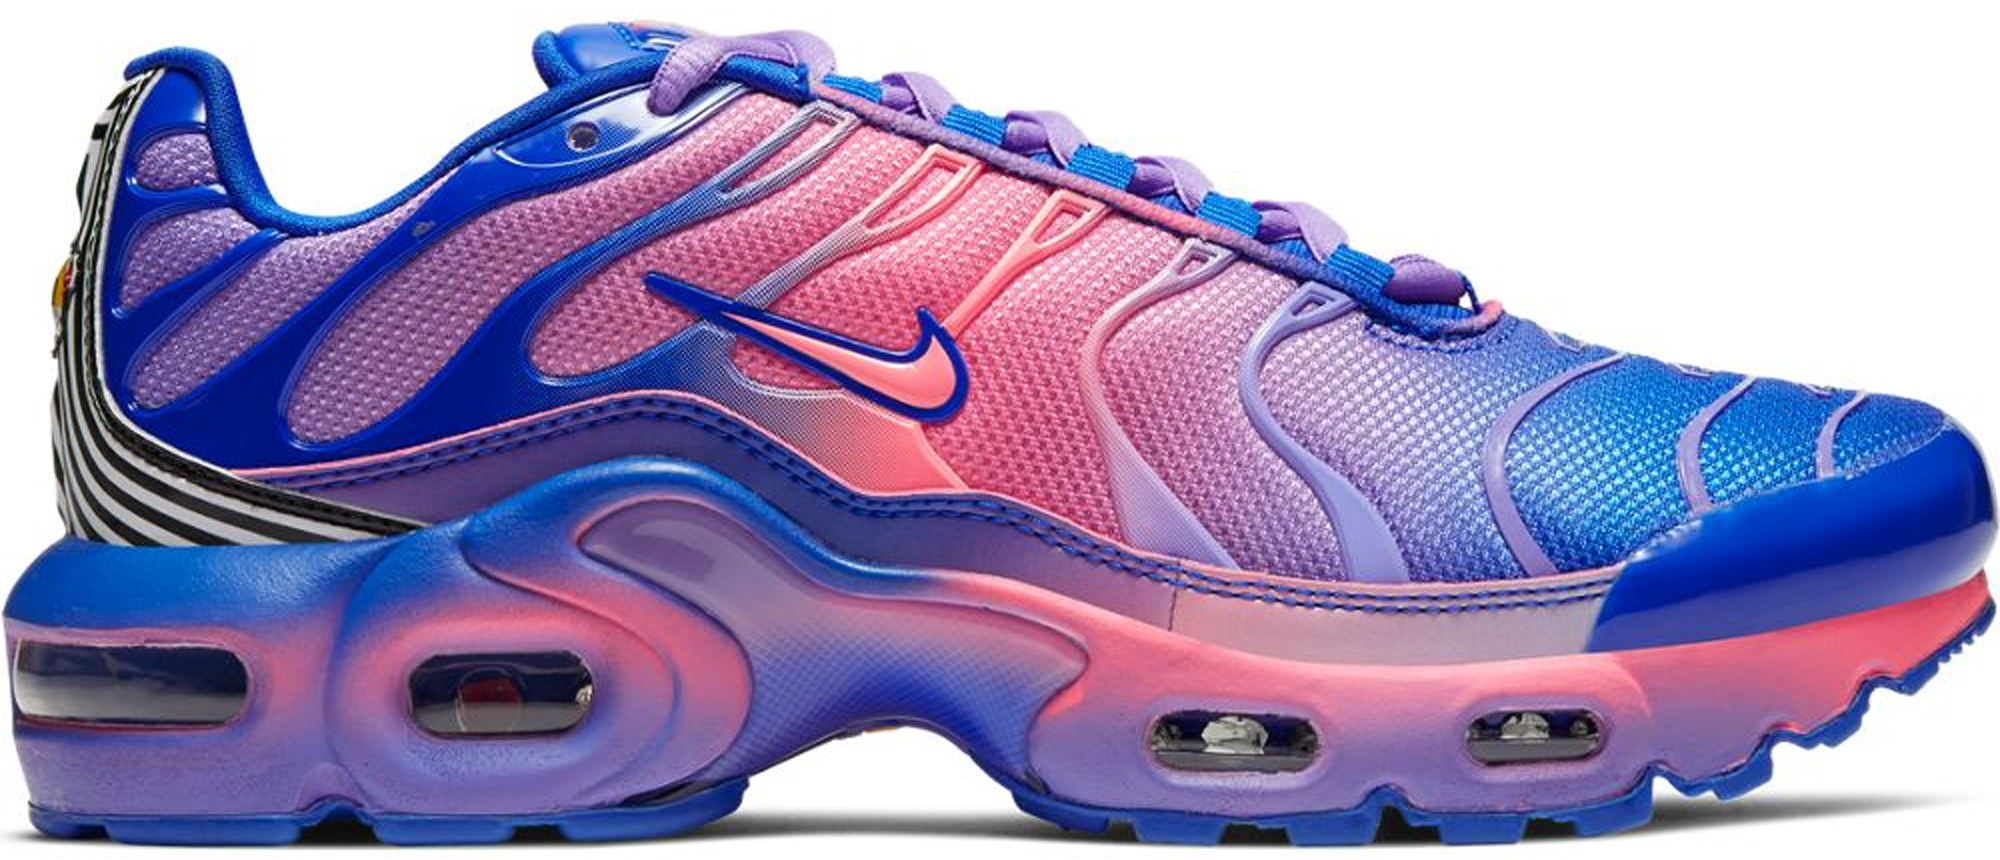 nike air max plus navy fade for sale